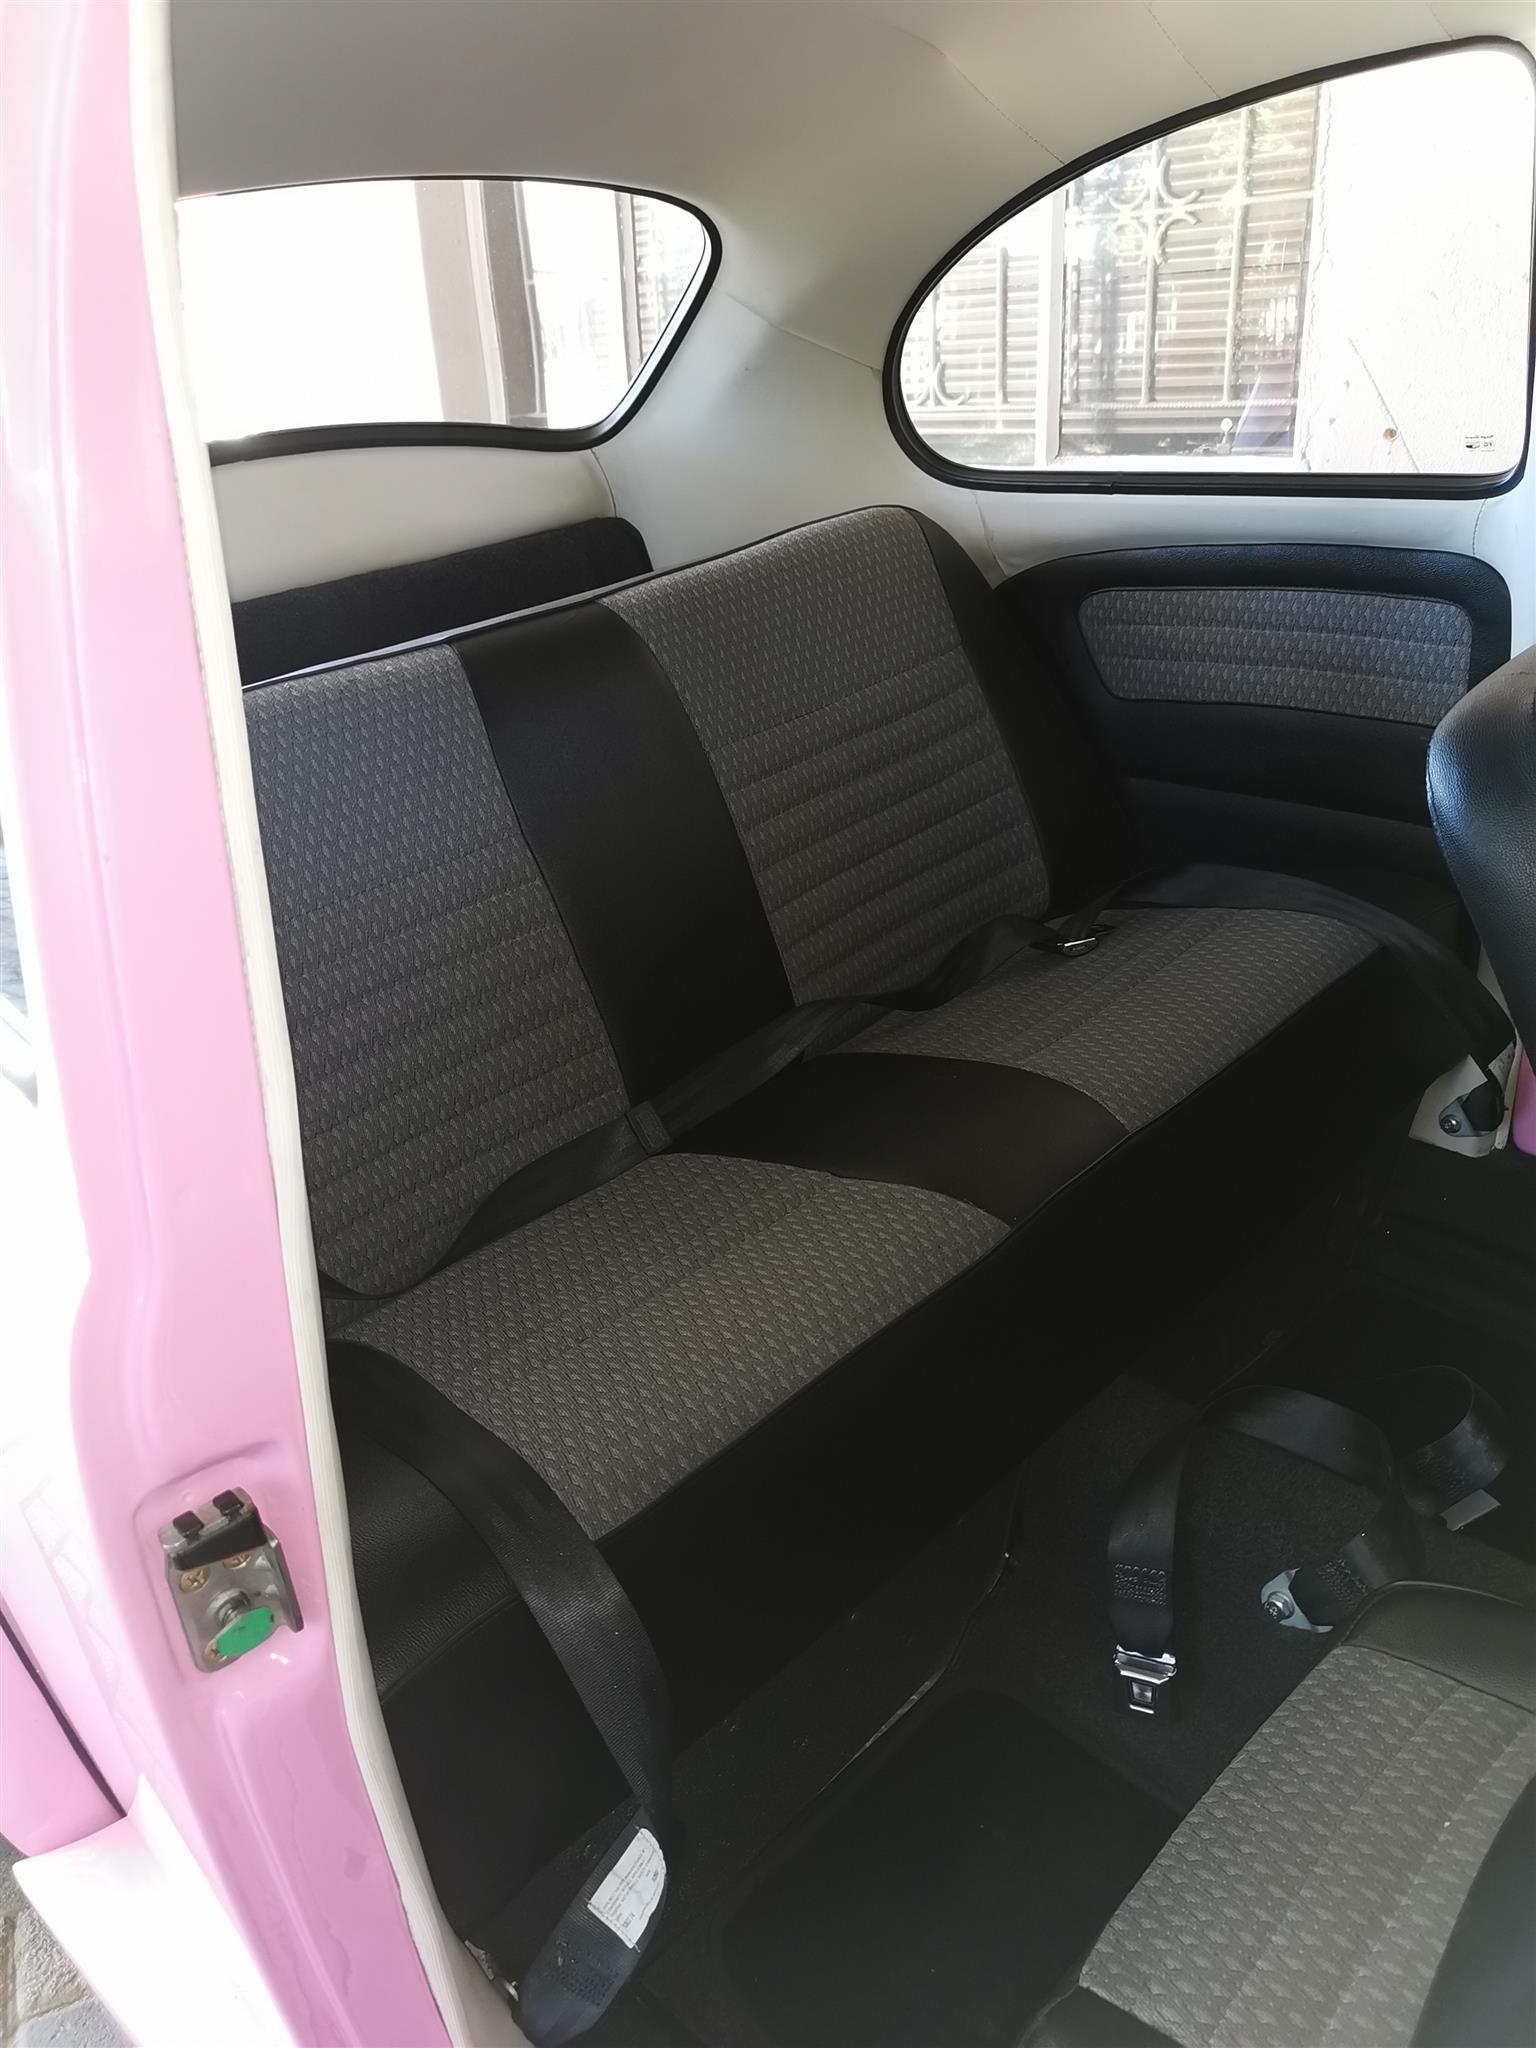 1986 VW beach buggy {pink}  FULLY RESTORED